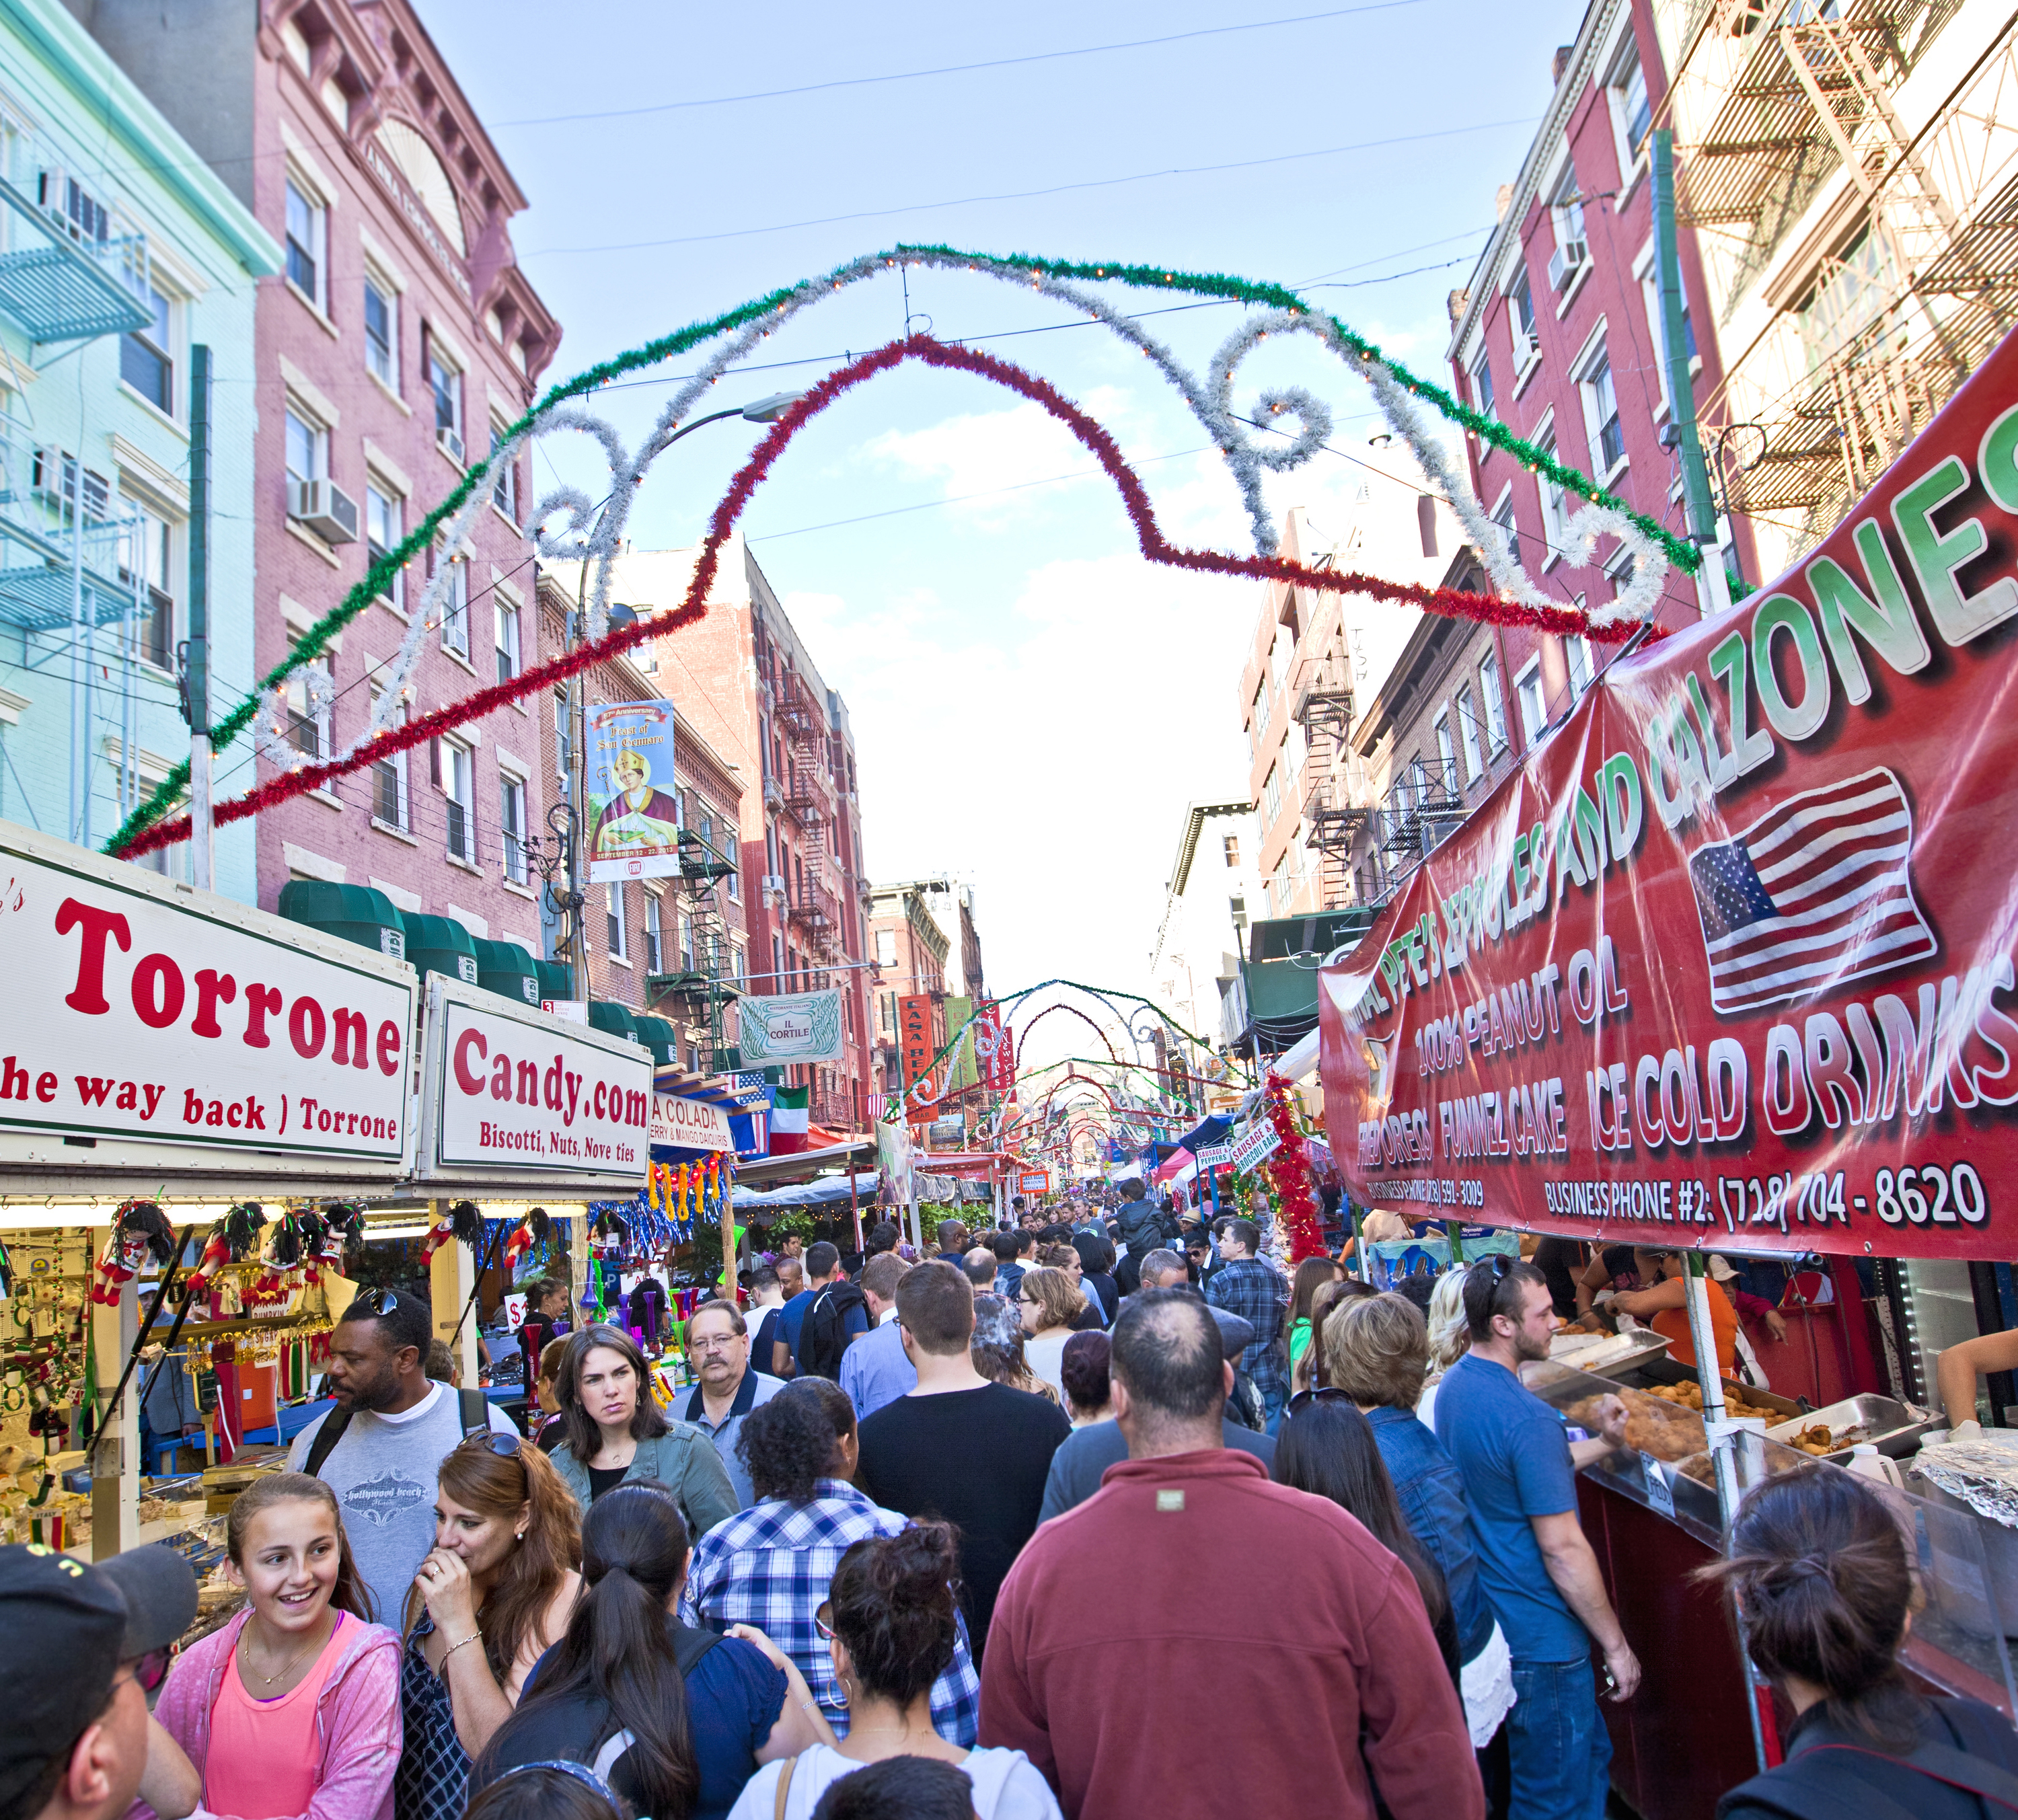 mulberry street christmas parade 2020 nyc Feast Of San Gennaro 2020 Guide With Schedule Little Italy Tips mulberry street christmas parade 2020 nyc